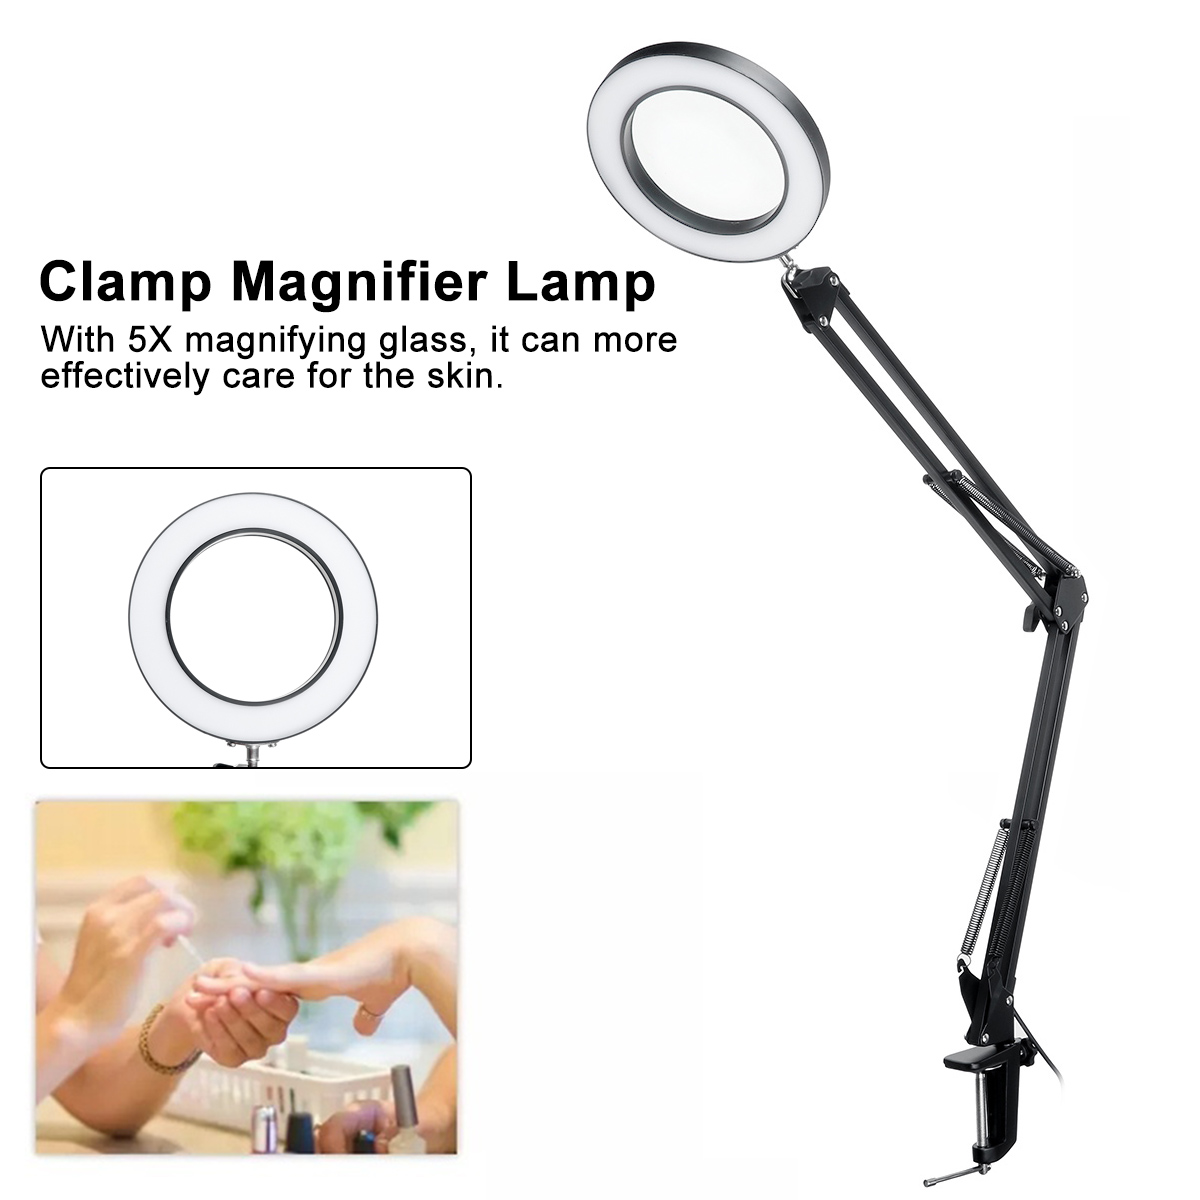 5X-Magnifying-Lamp-Clamp-Mount-LED-Magnifier-Lamp-Manicure-Tattoo-Beauty-Light-1801341-8